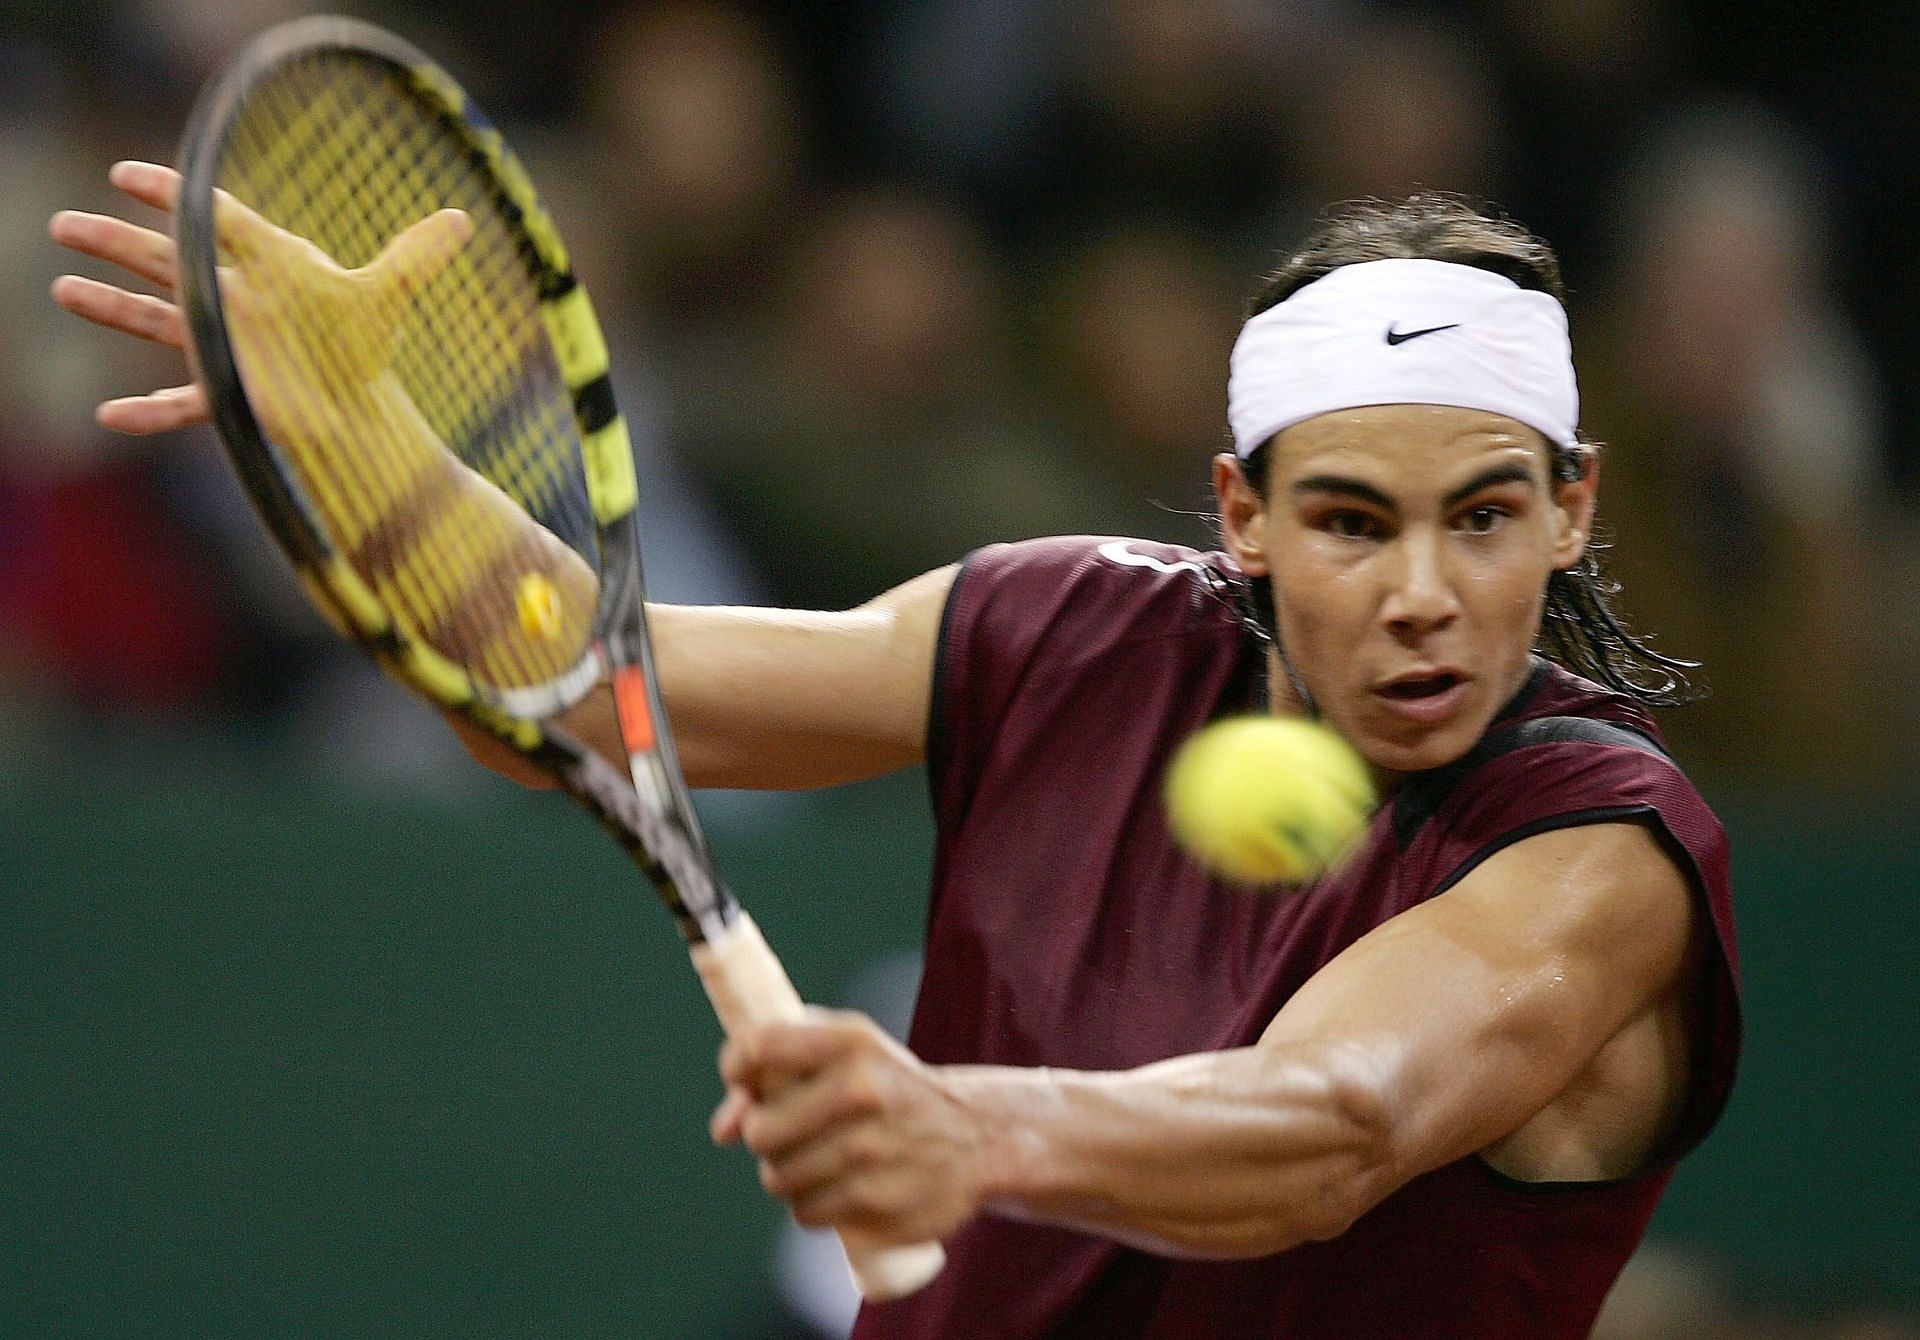 Rafael Nadal won the Junior Davis Cup with Spain in 2002